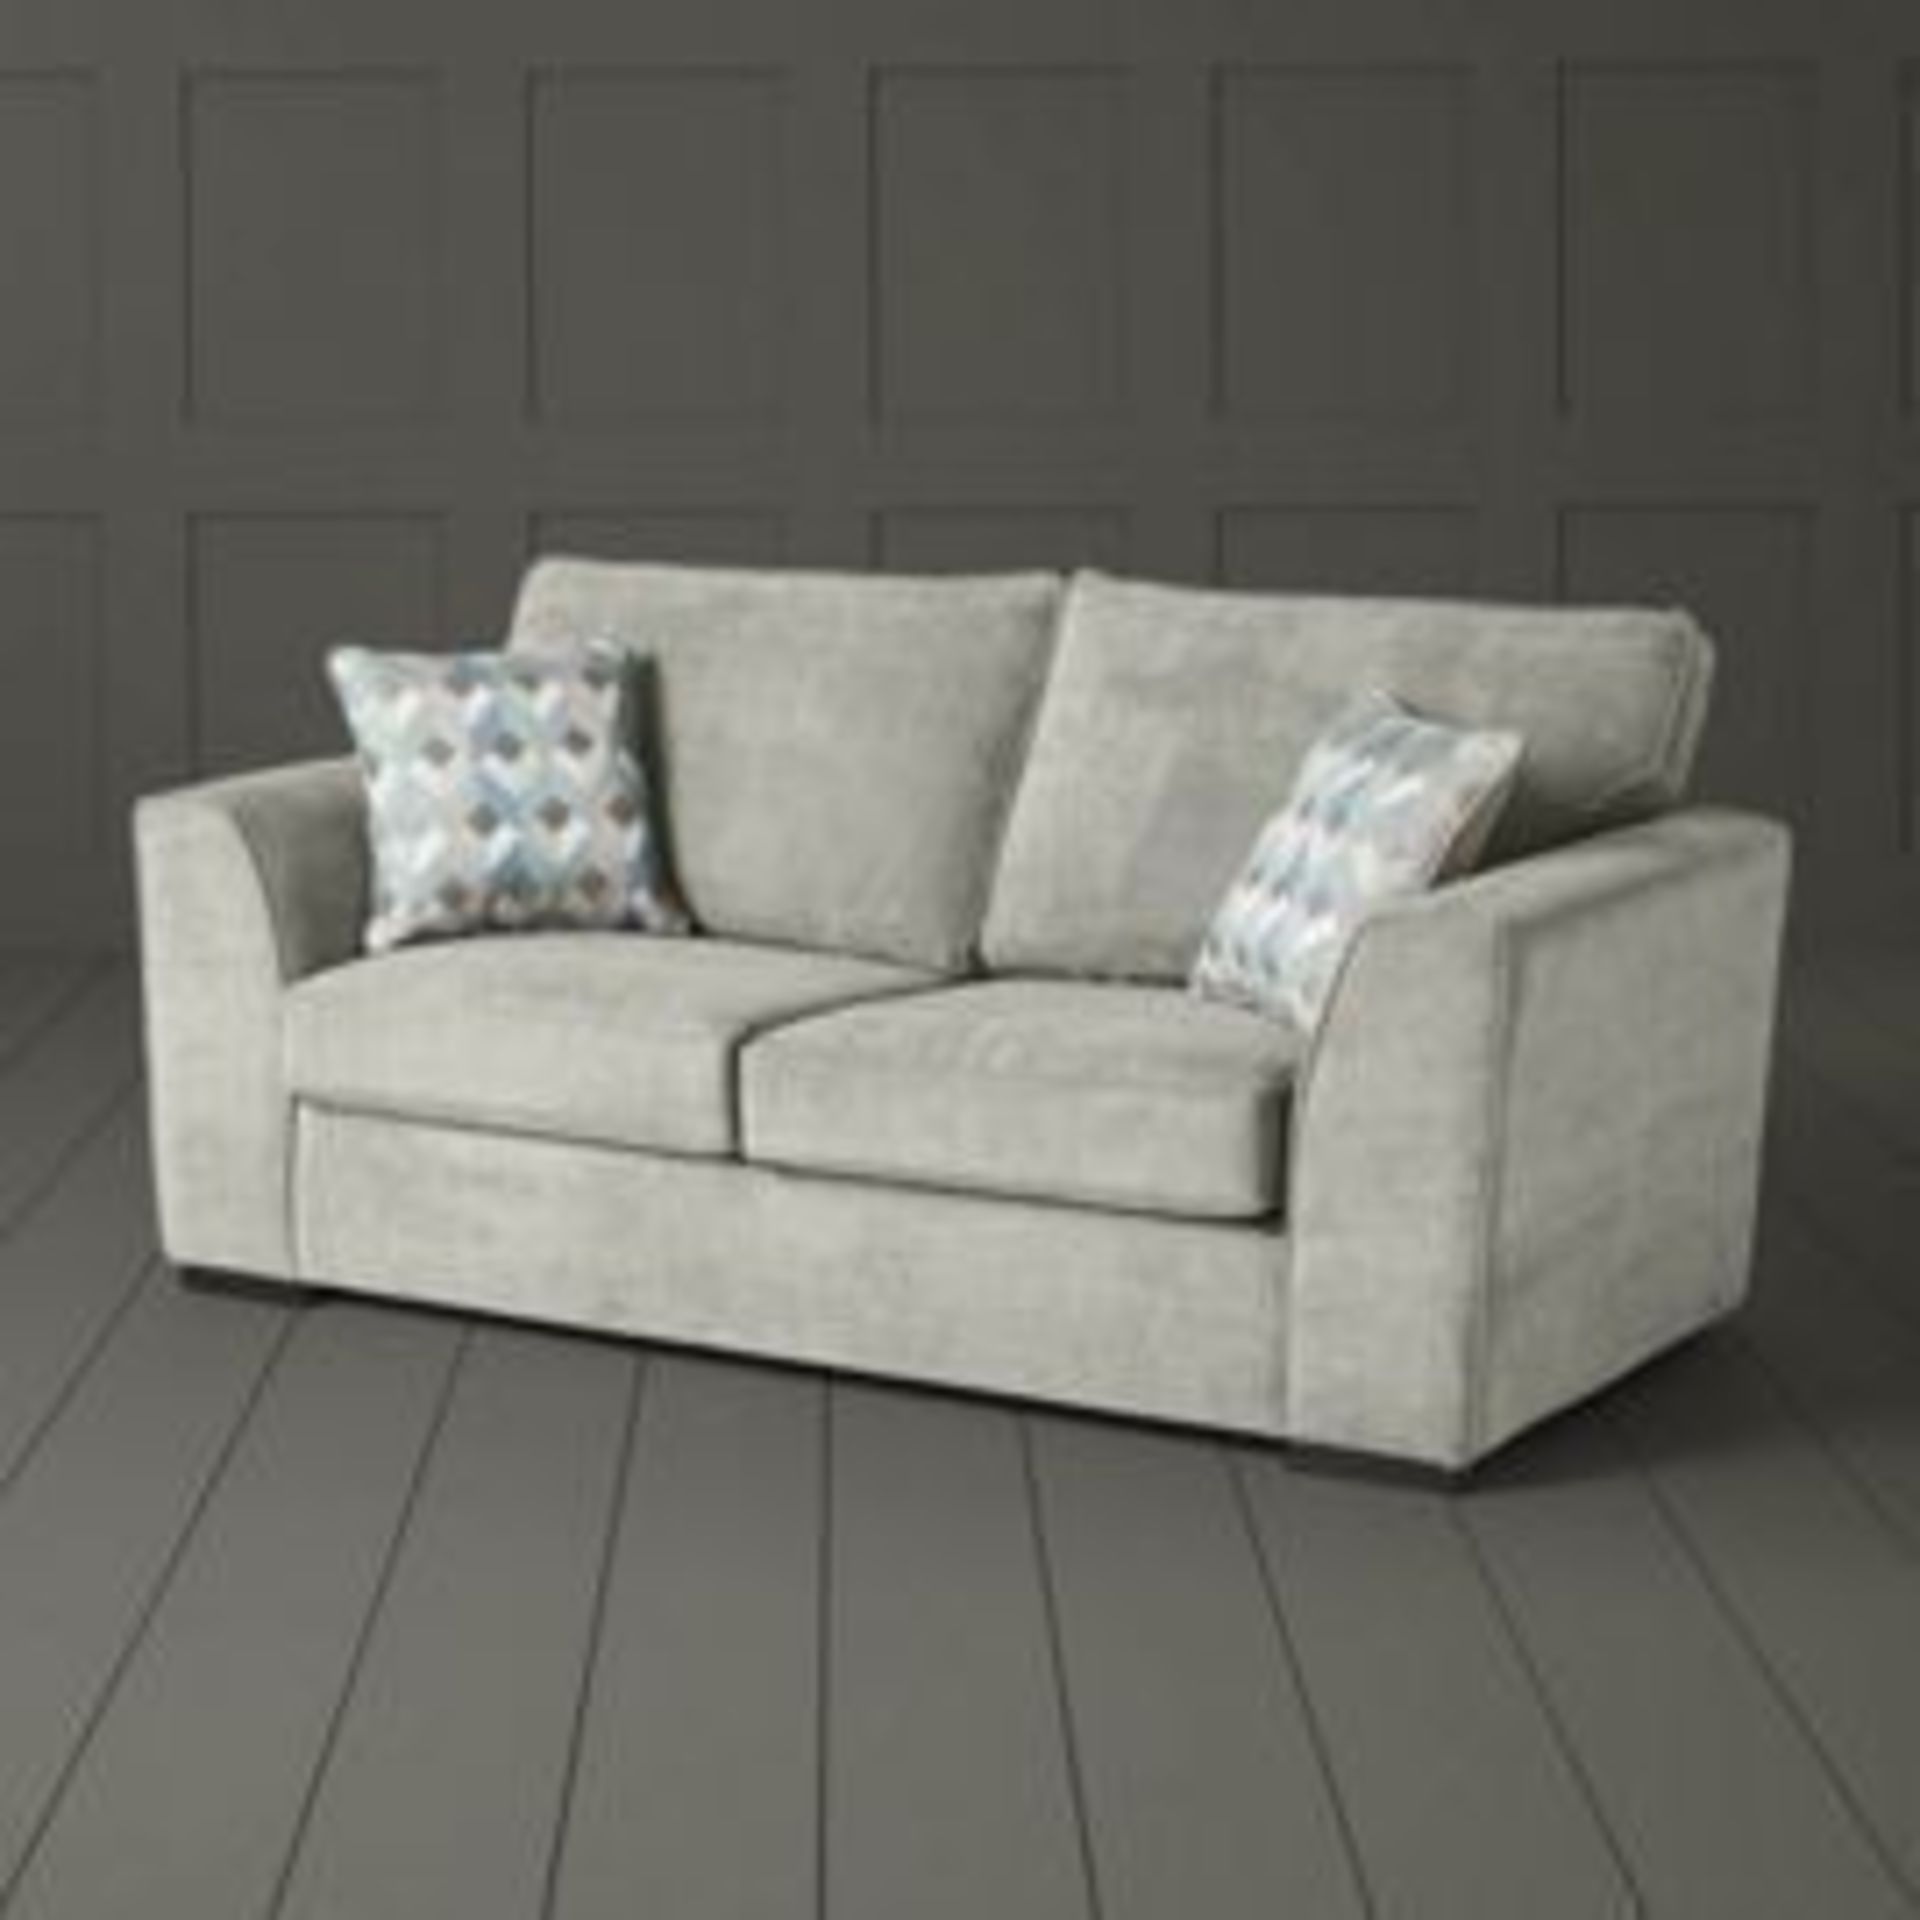 1 BRAND NEW BAGGED BOSTON 3 SEATER SOFA IN LIGHT GREY / CTS07907 (VIEWING HIGHLY RECOMMENDED)